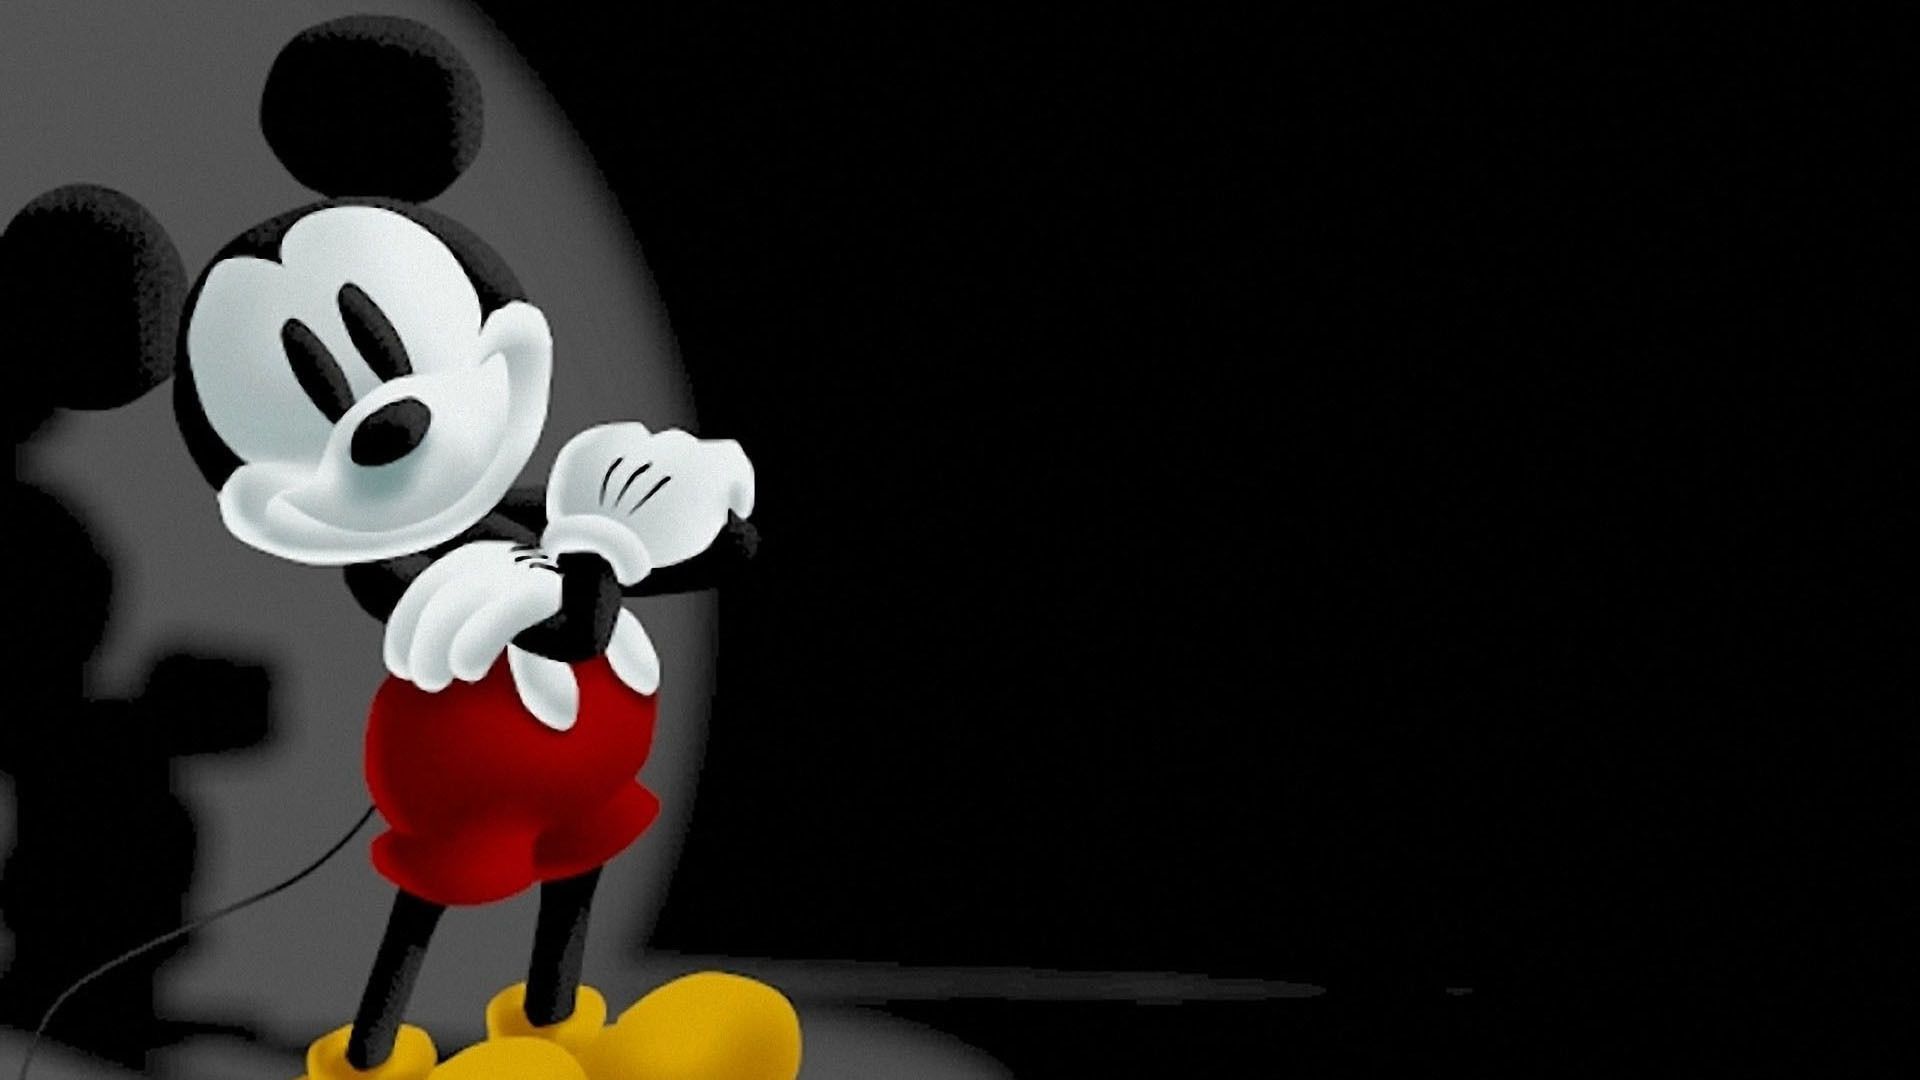 Mickey Mouse Wallpaper Image Photo Picture Background